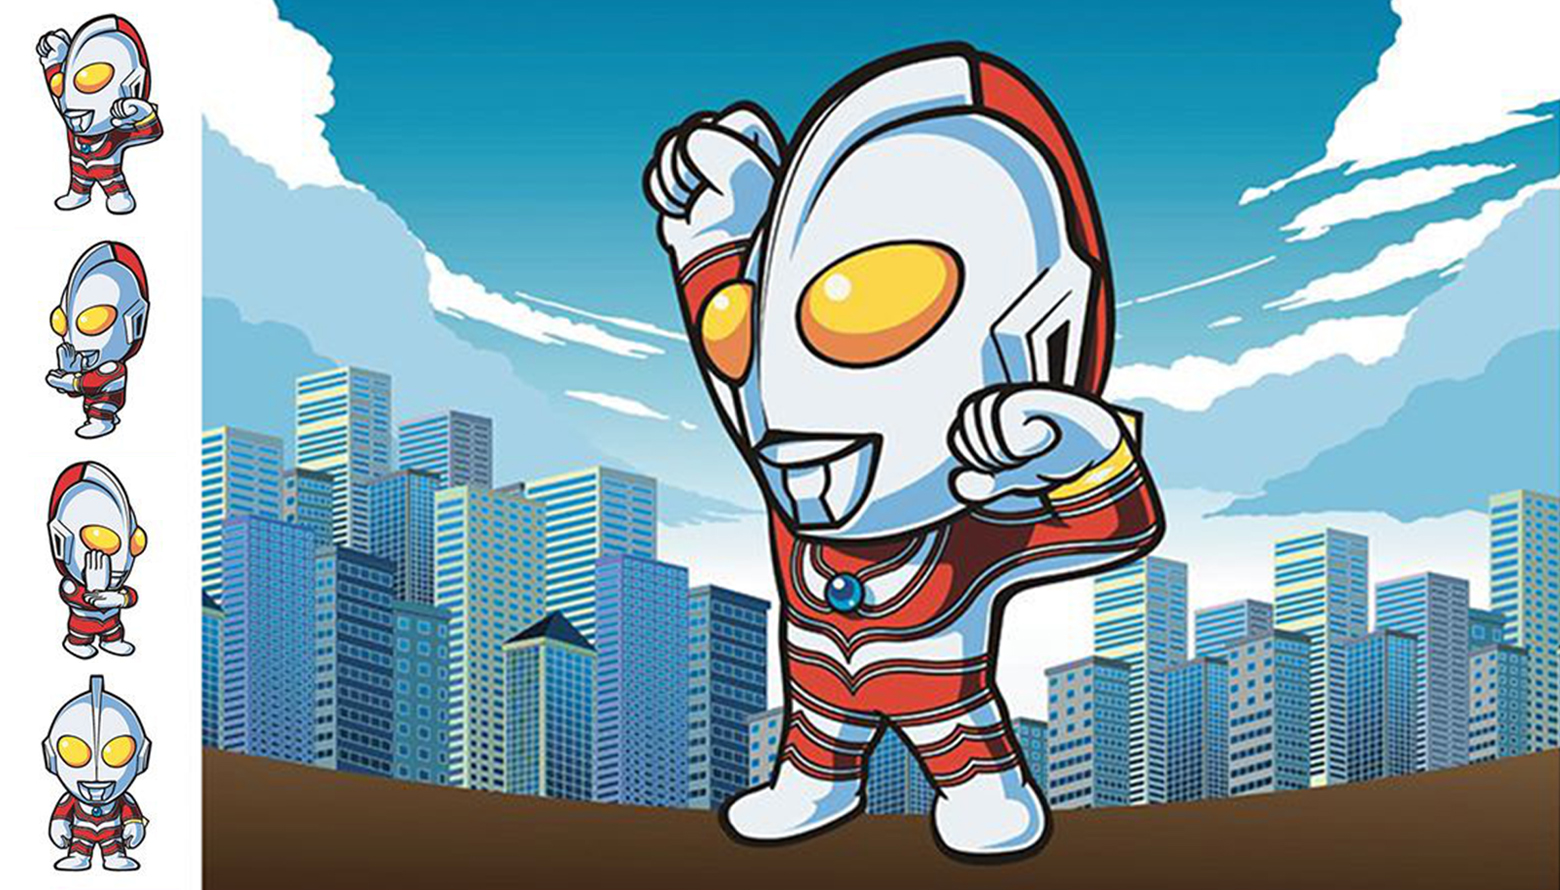 ULTRAMAN FAN ART EXTRAVAGANZA IS HERE! CHECK OUT THE RULES!